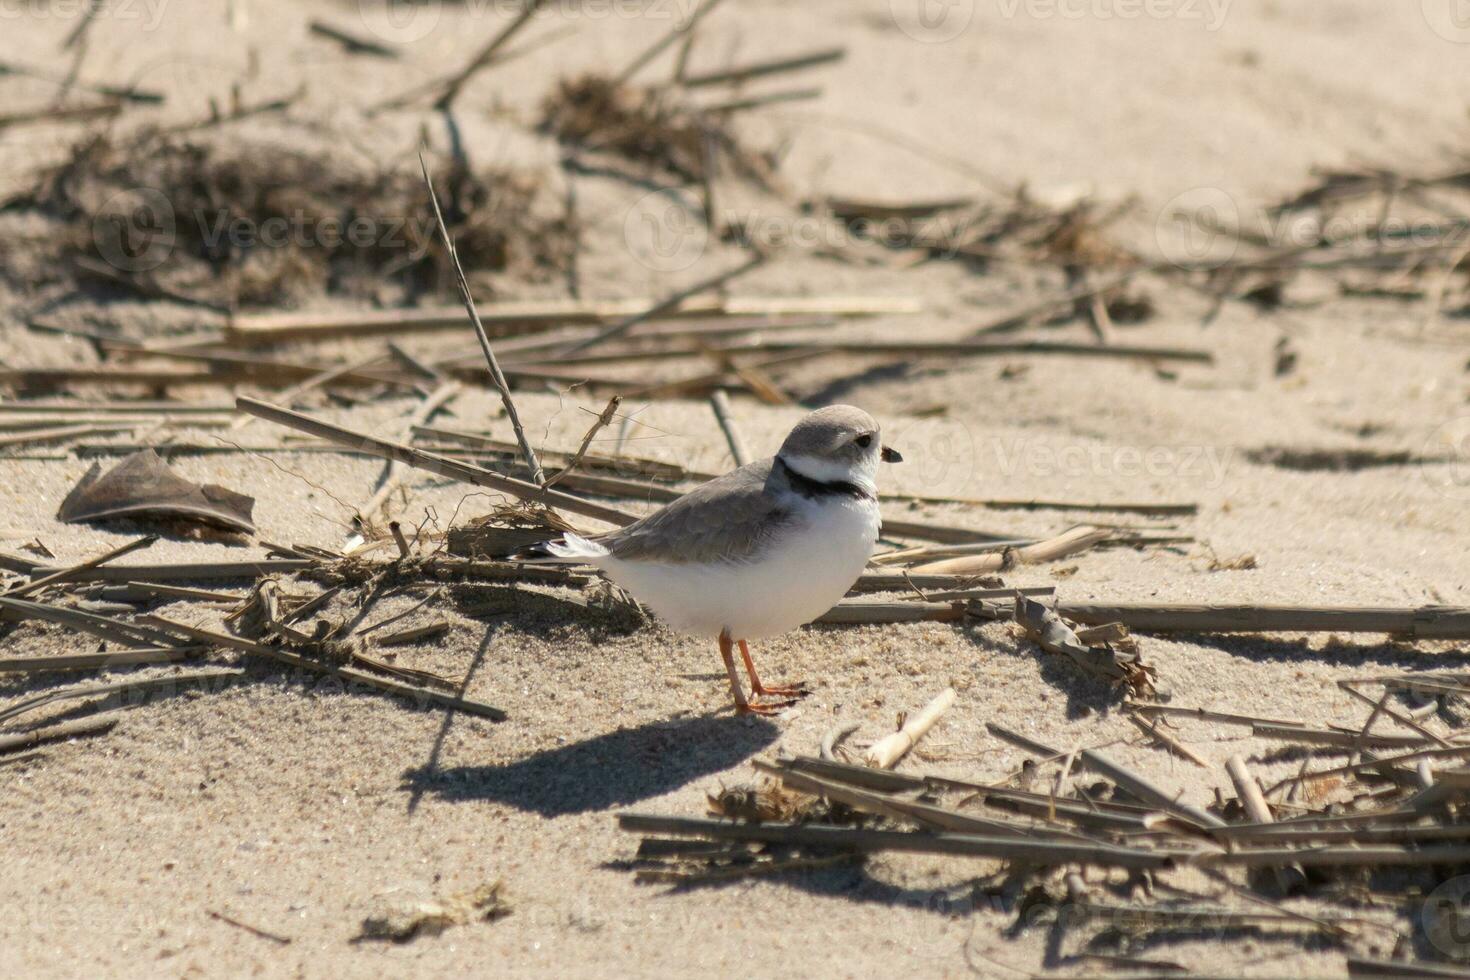 This cute little Piping Plover was seen here on the beach when I took this picture. This shorebird is so tiny and searches the sand for food washed up by the surf. I love the ring around his neck. photo